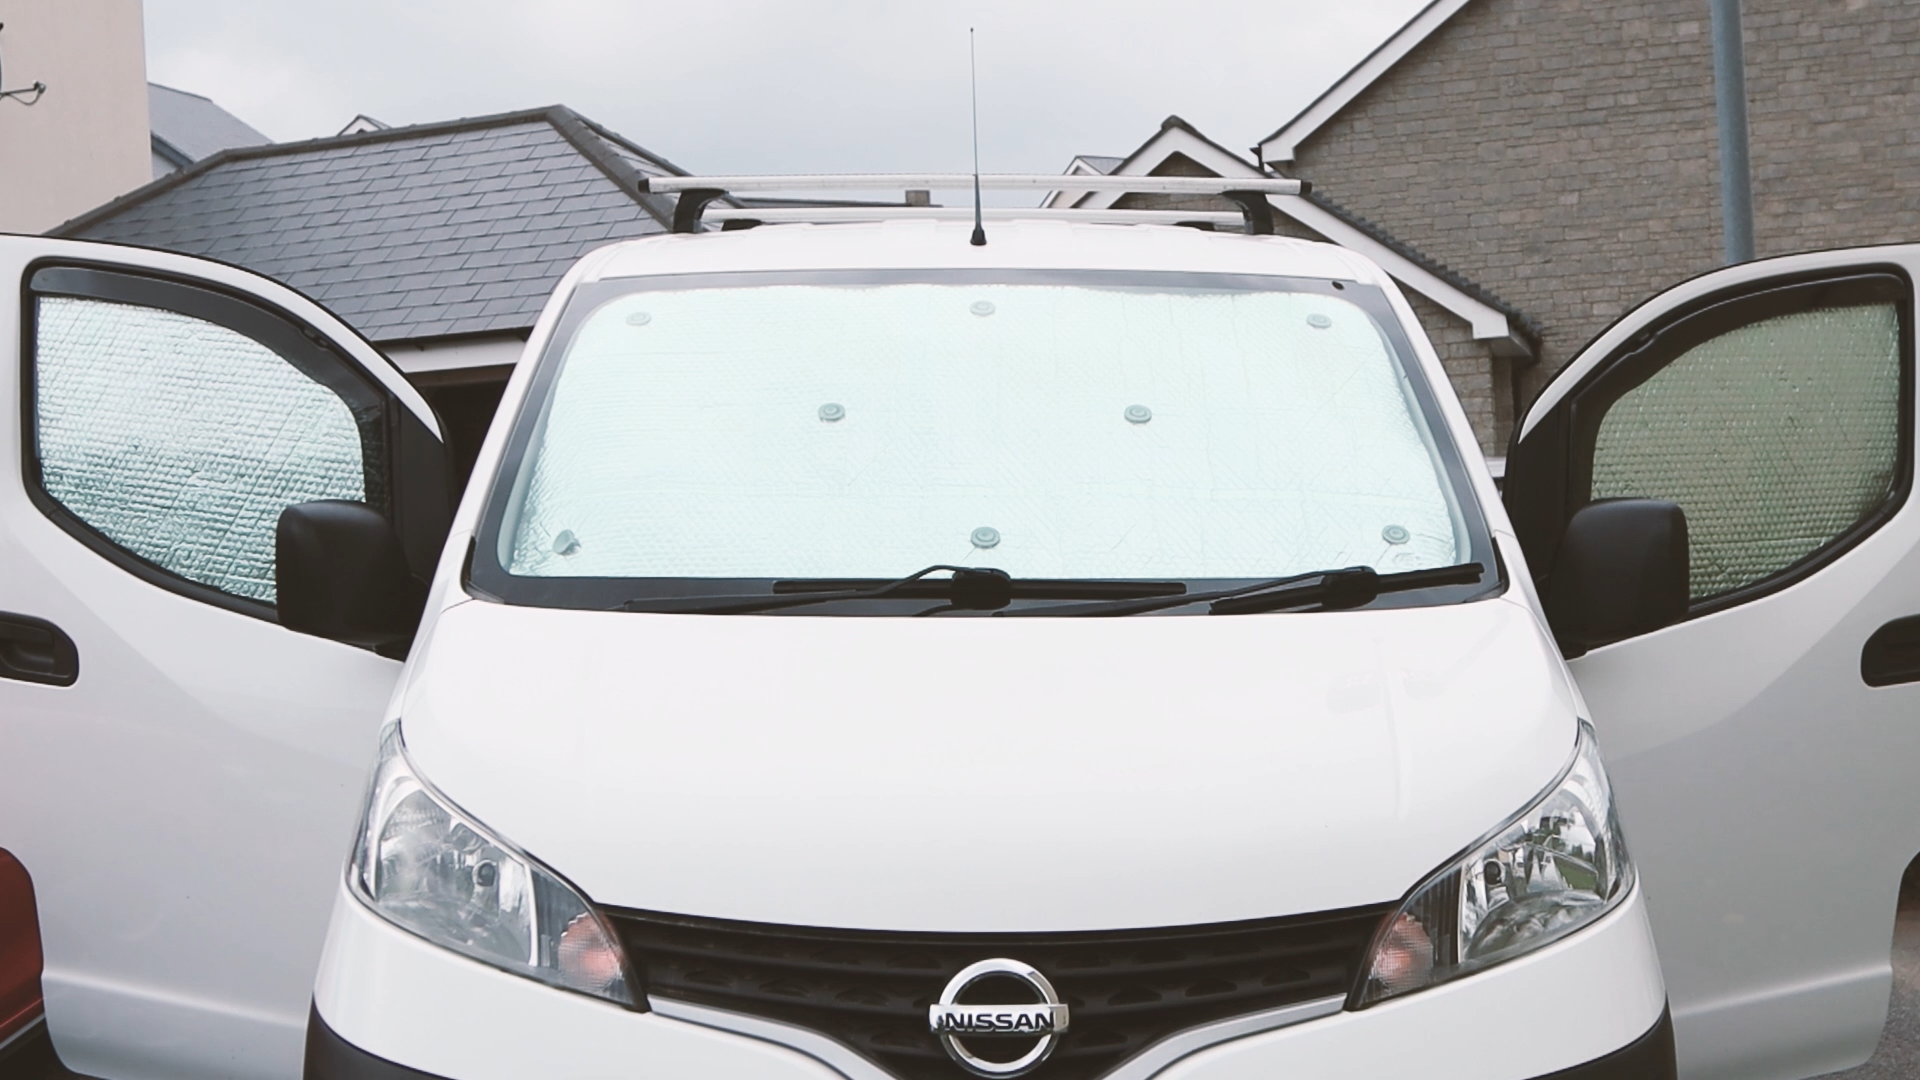 Small panel van with DIY thermal blackout window covers